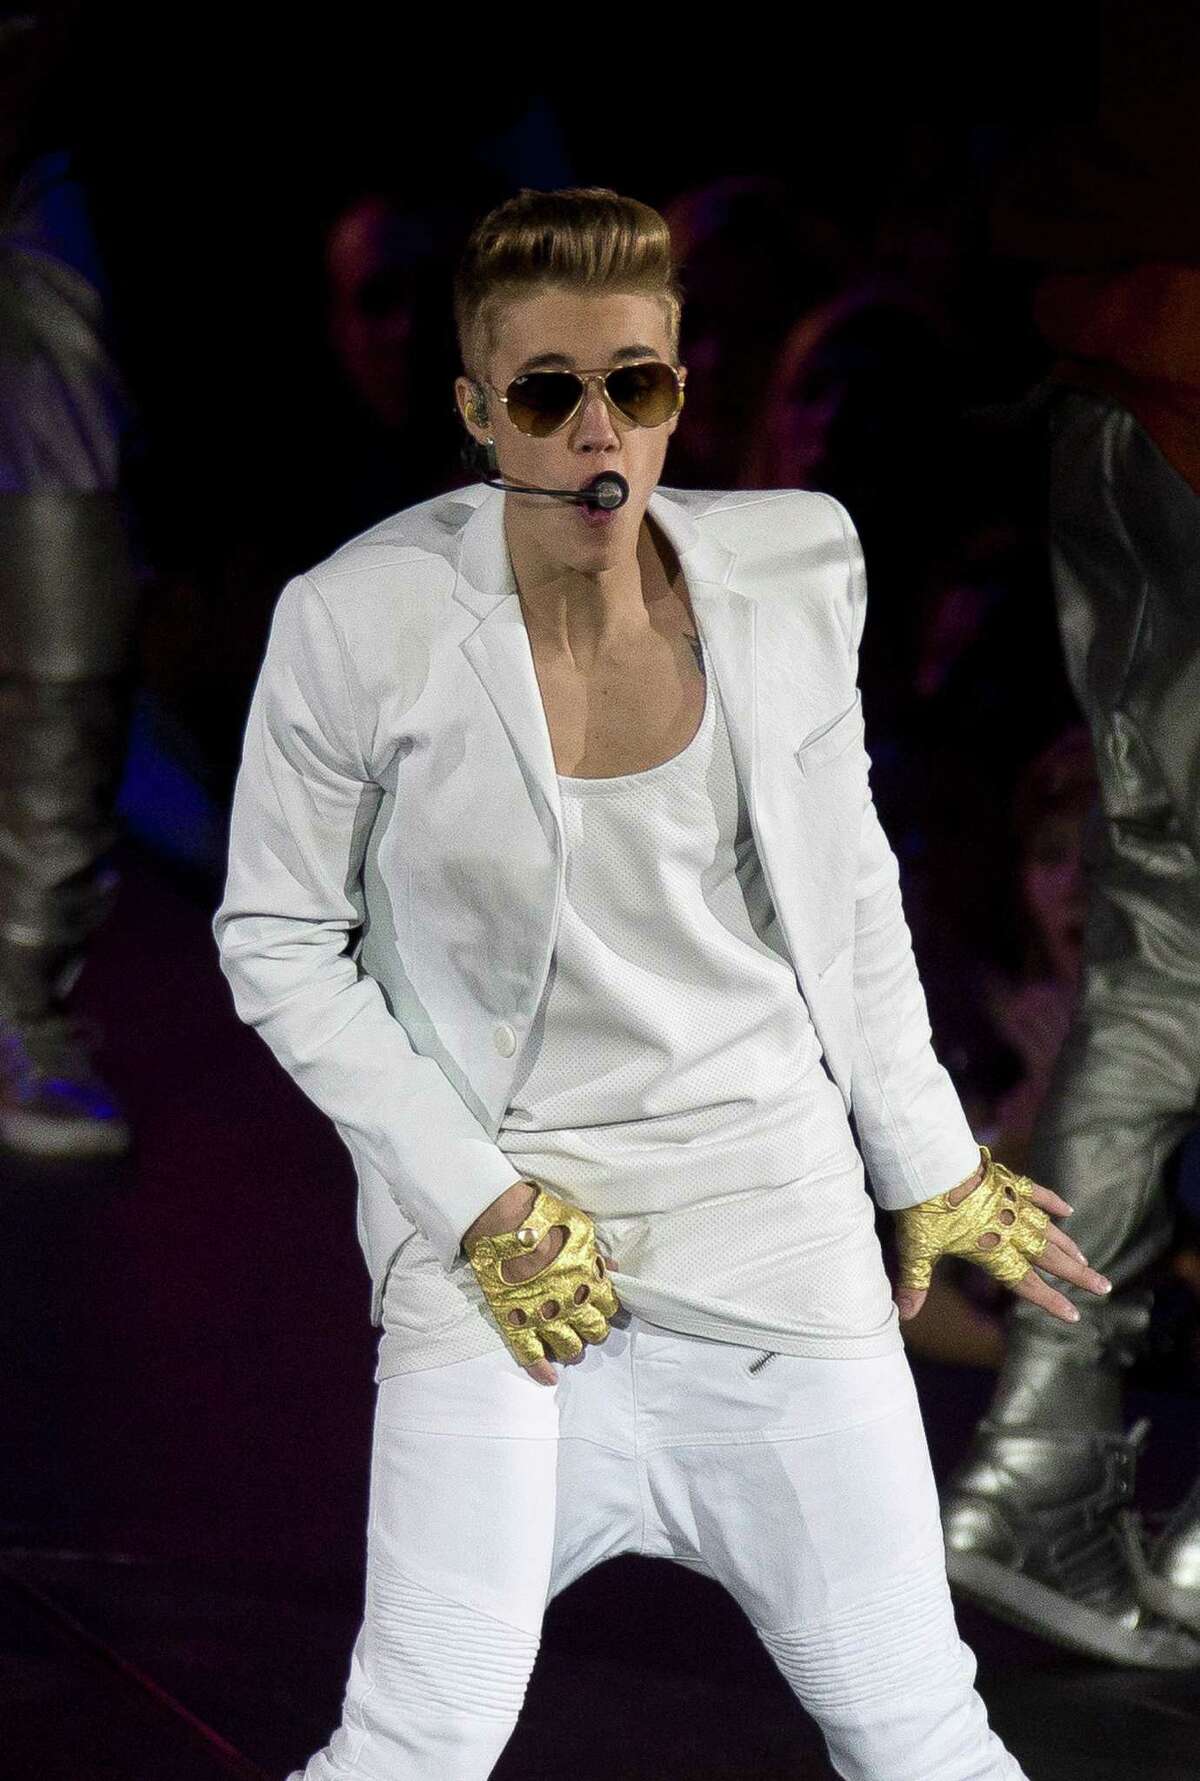 Canadian singer Justin Bieber performs at the o2 Arena in east London, Monday, March 4, 2013. (Photo by Joel Ryan/Invision/AP)